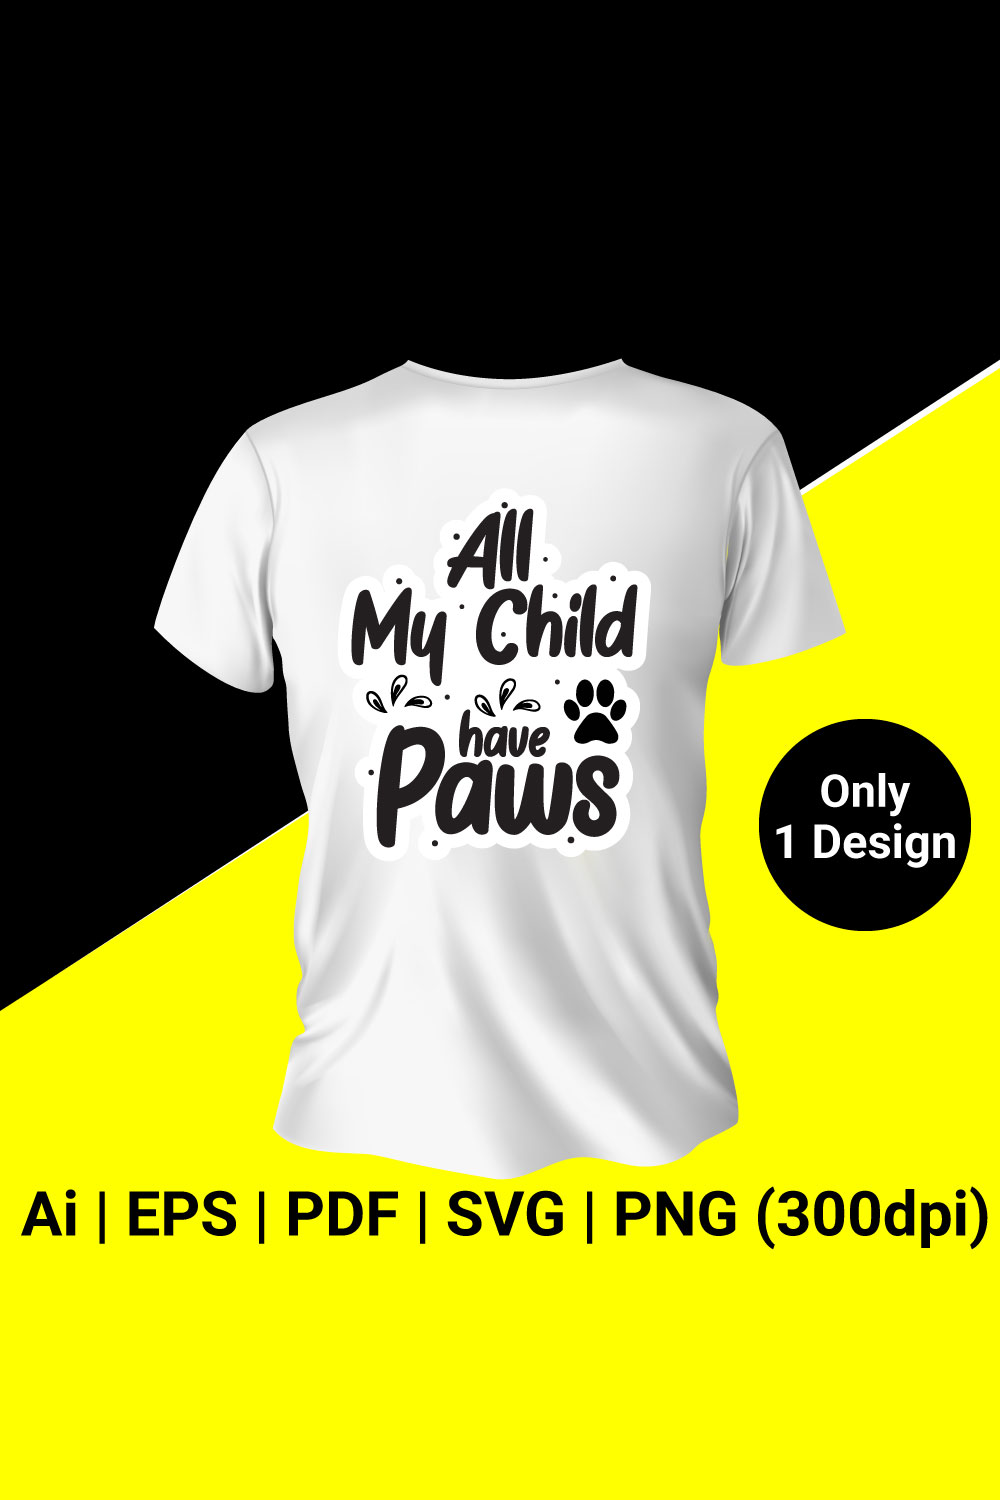 All My Child Have Paws T-shirt Design for Cat Lover pinterest image.